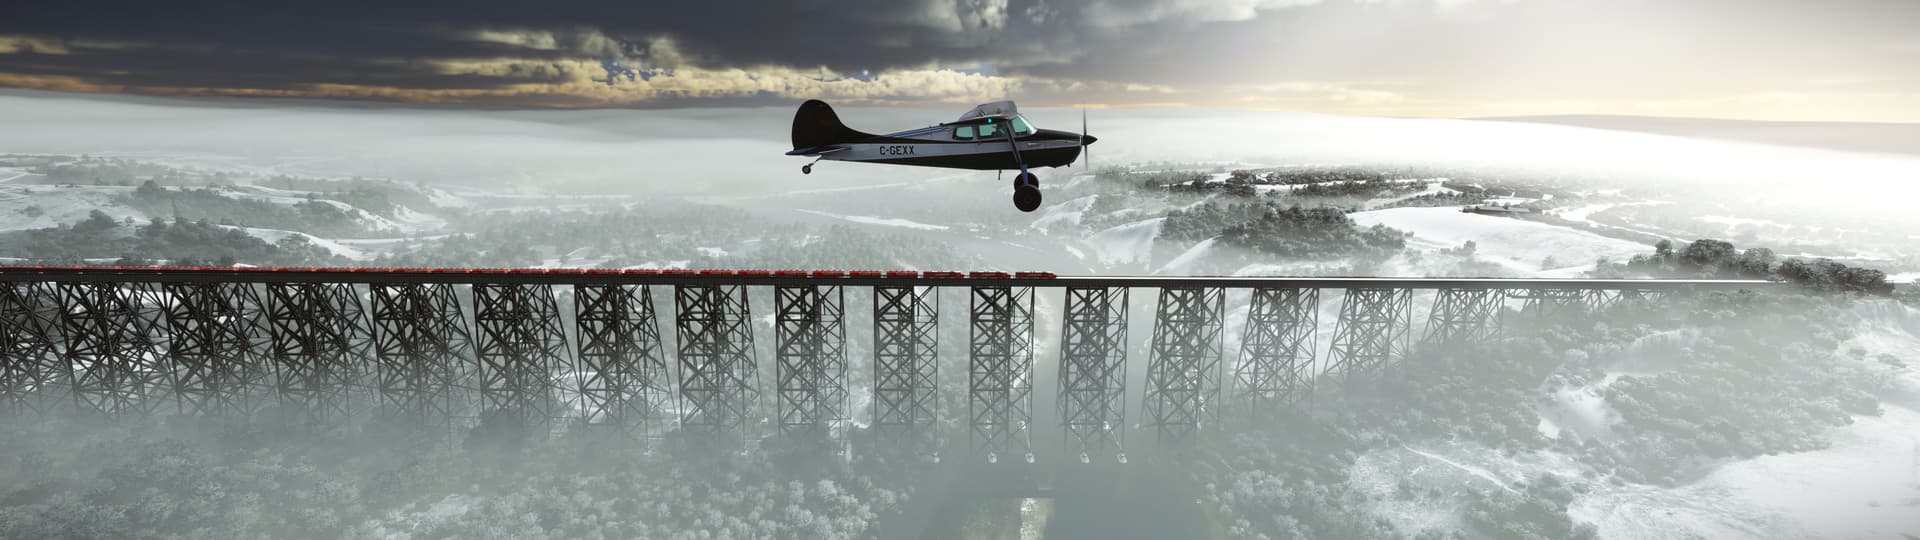 A high-wing Cessna flies parallel with a train on elevated train tracks below.